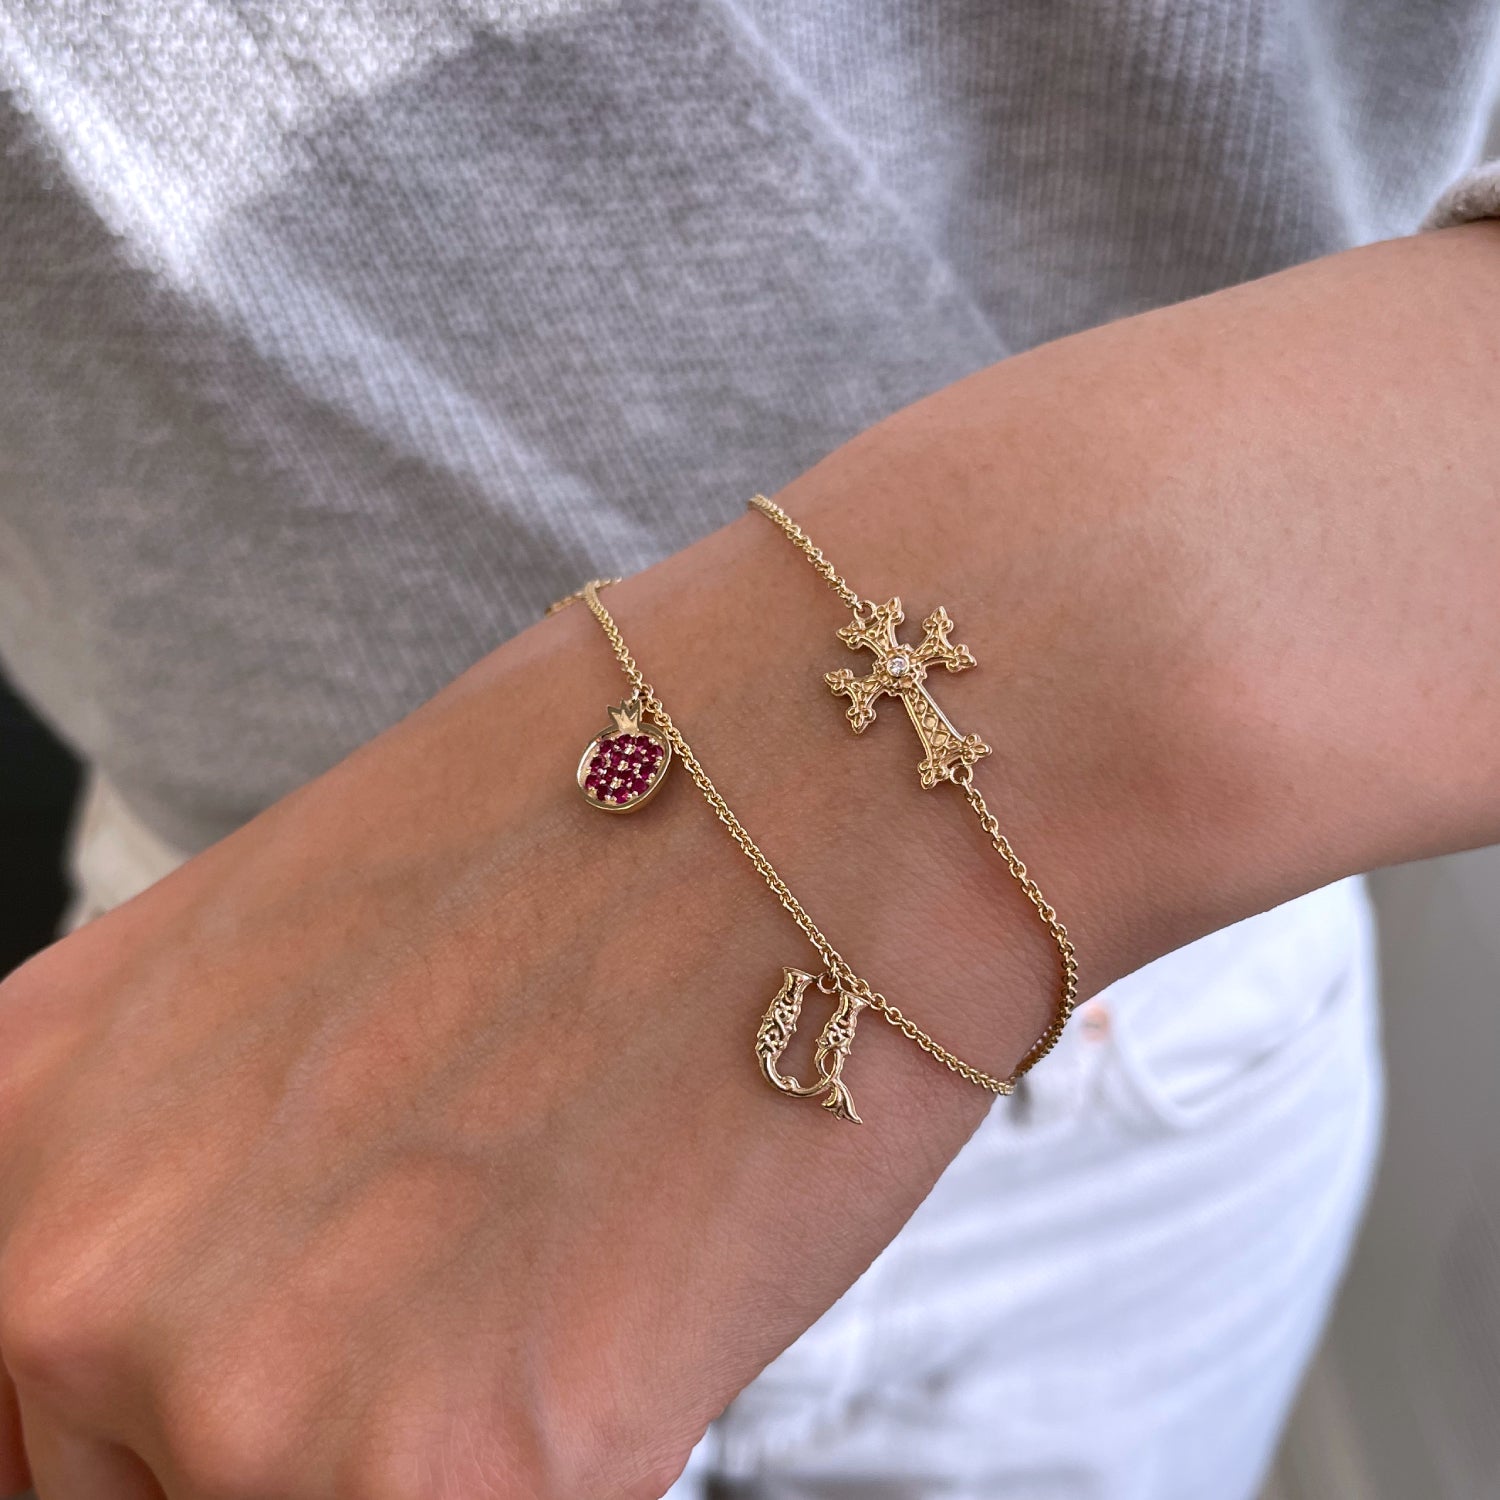 Cross Jewelry | Religious Bracelets + More | Alex and Ani – ALEX AND ANI